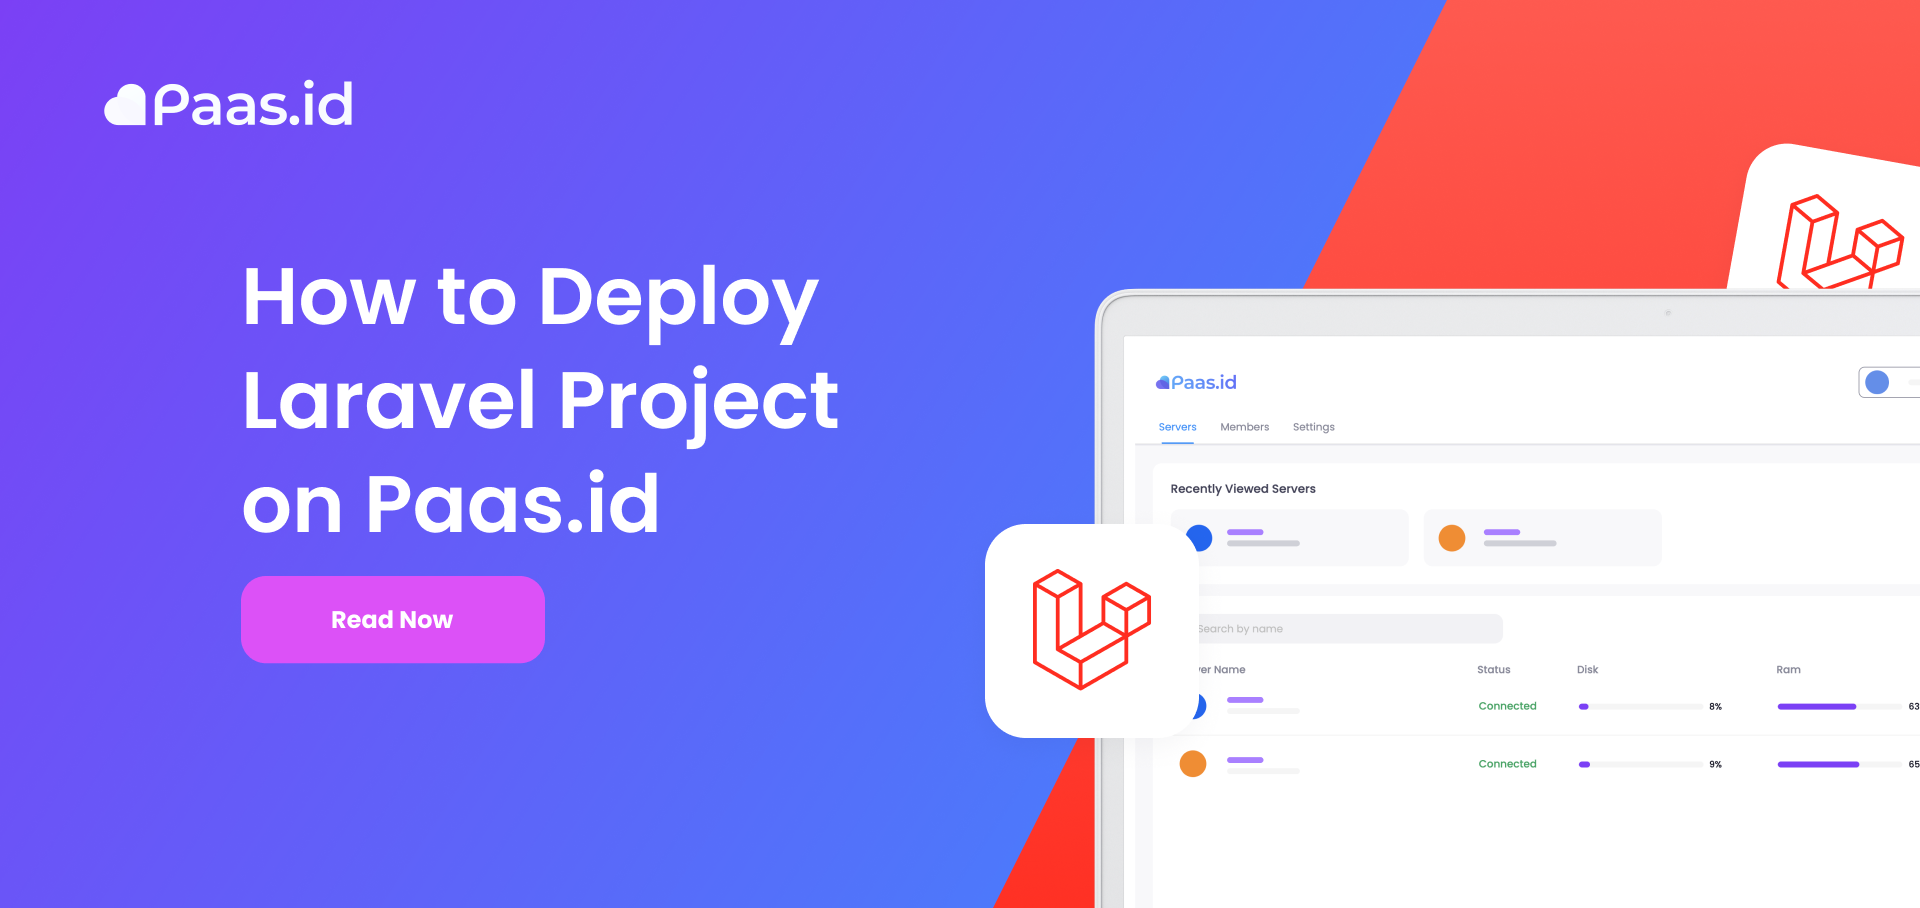 How to Deploy Laravel Project on Paas.id